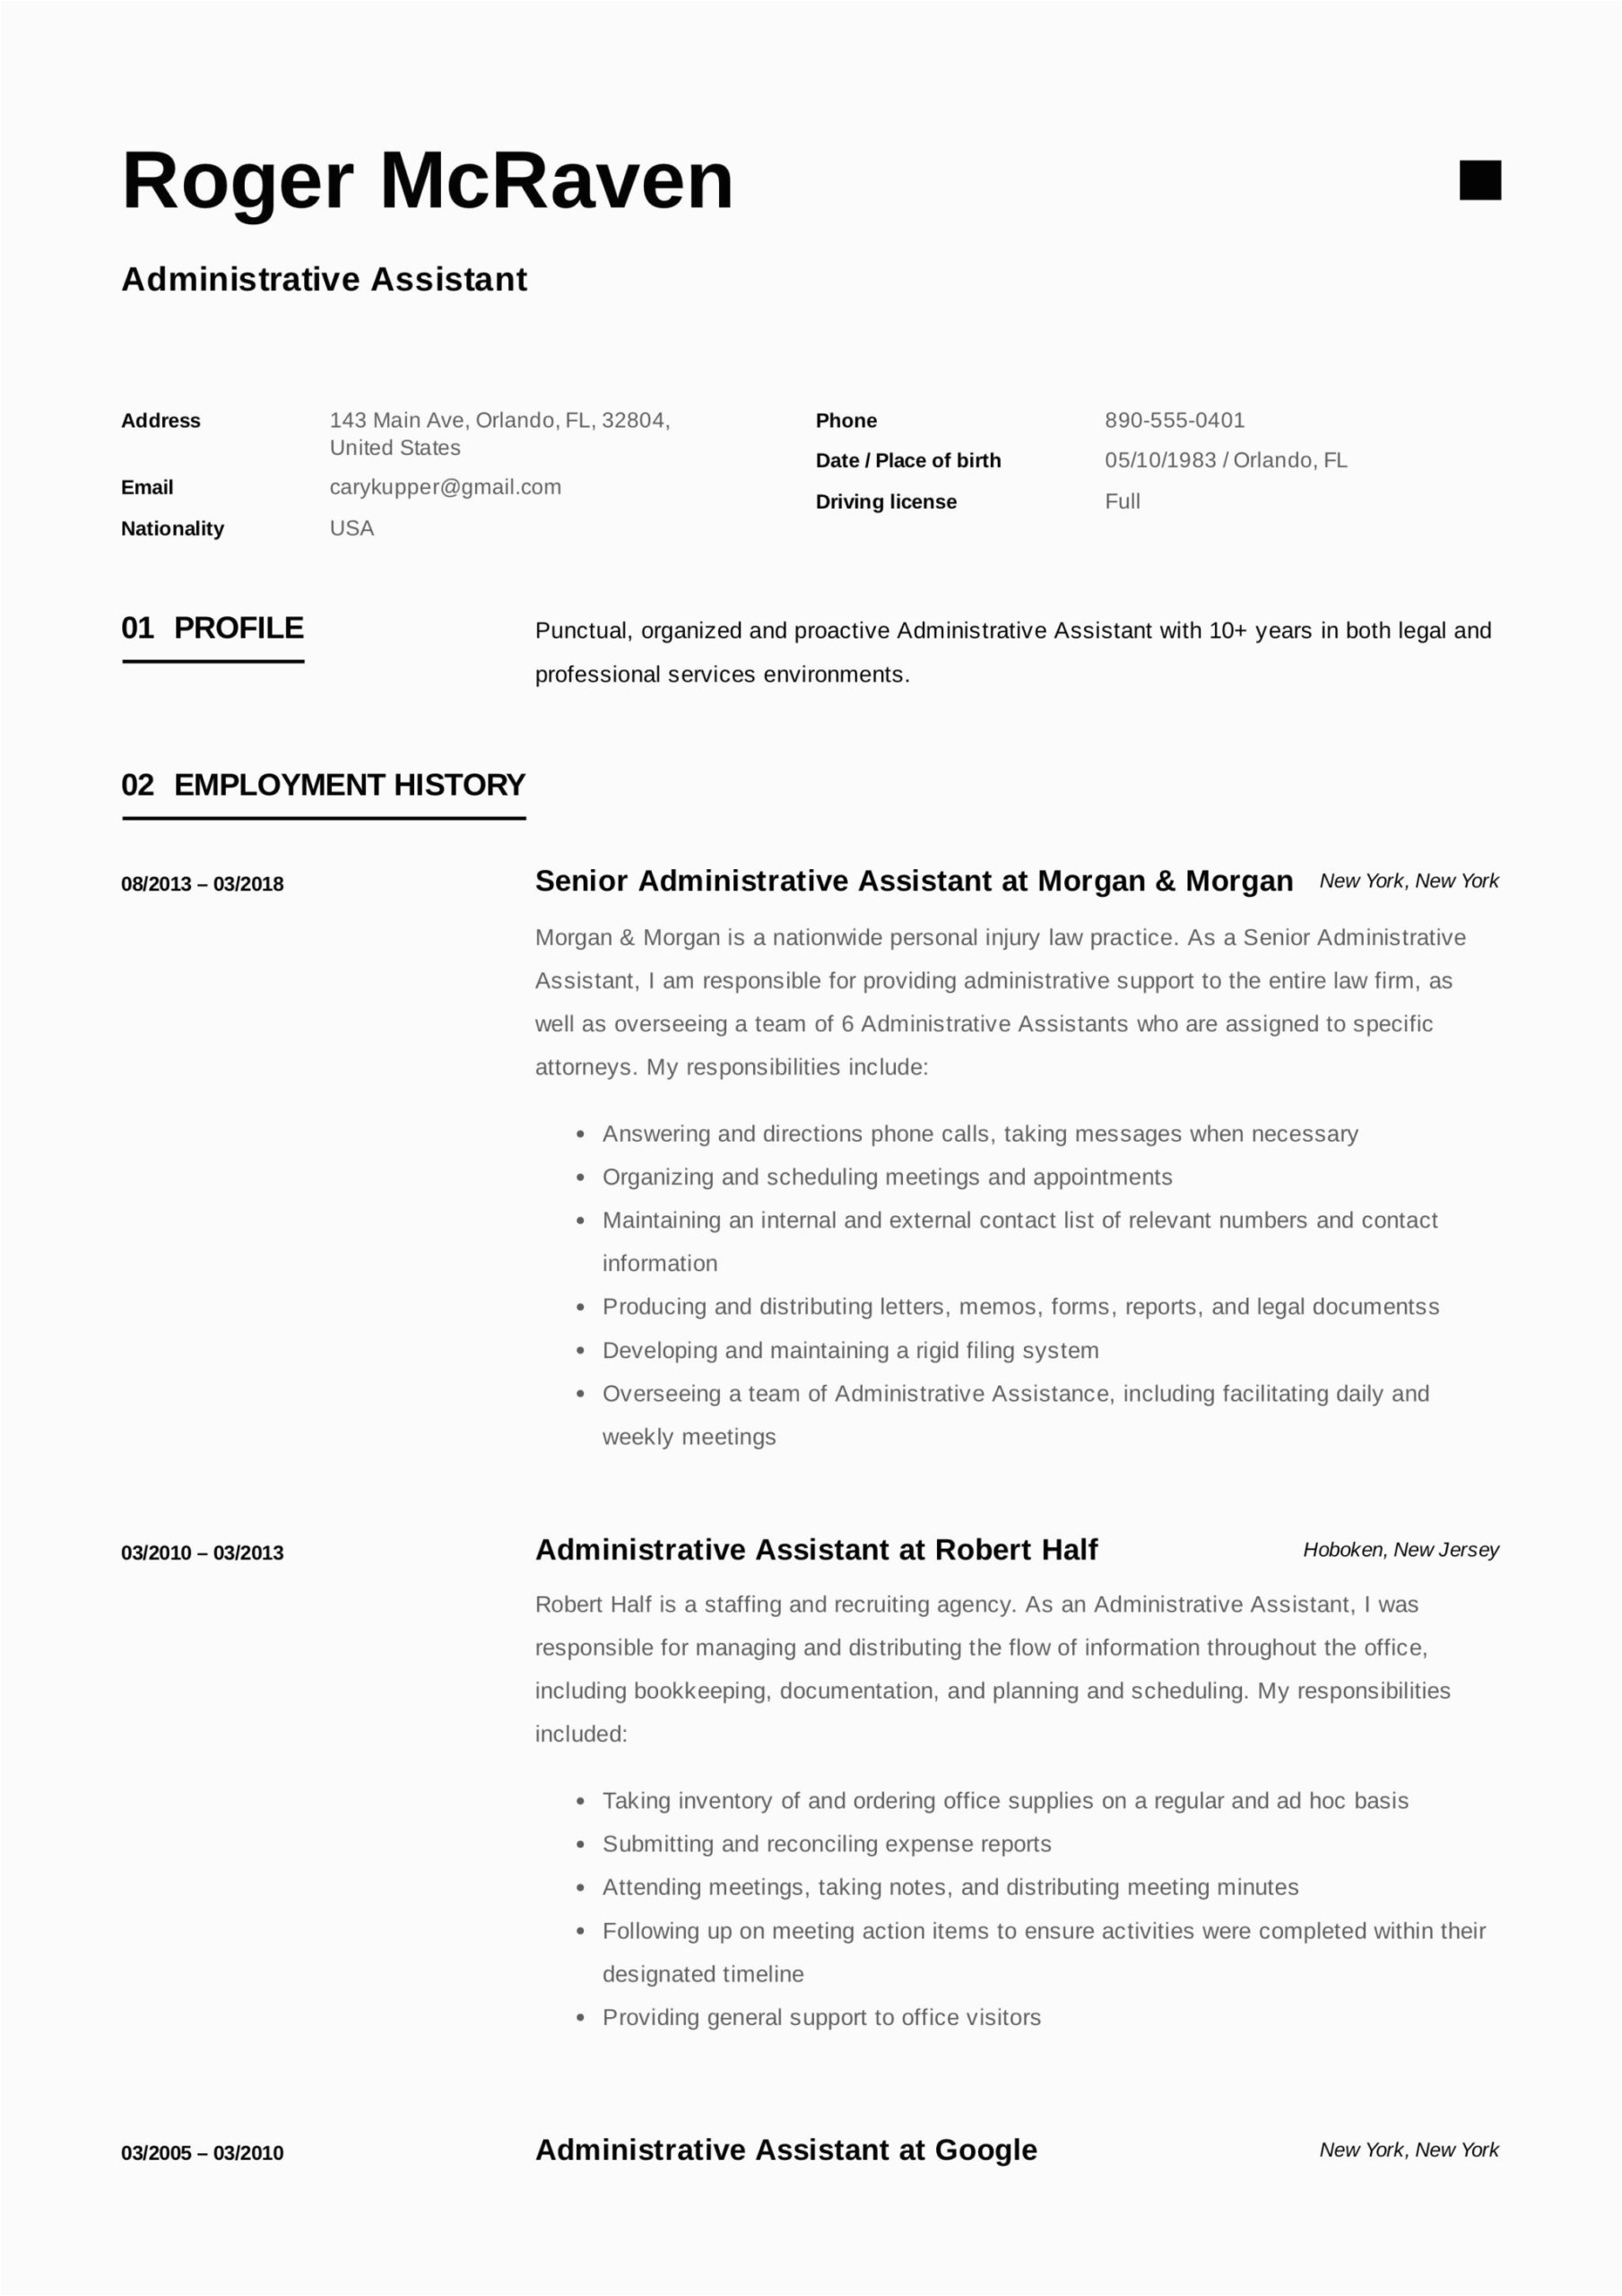 Resume Profile Samples for Admin assistant Full Guide Administrative assistant Resume [ 12 Samples ] Pdf